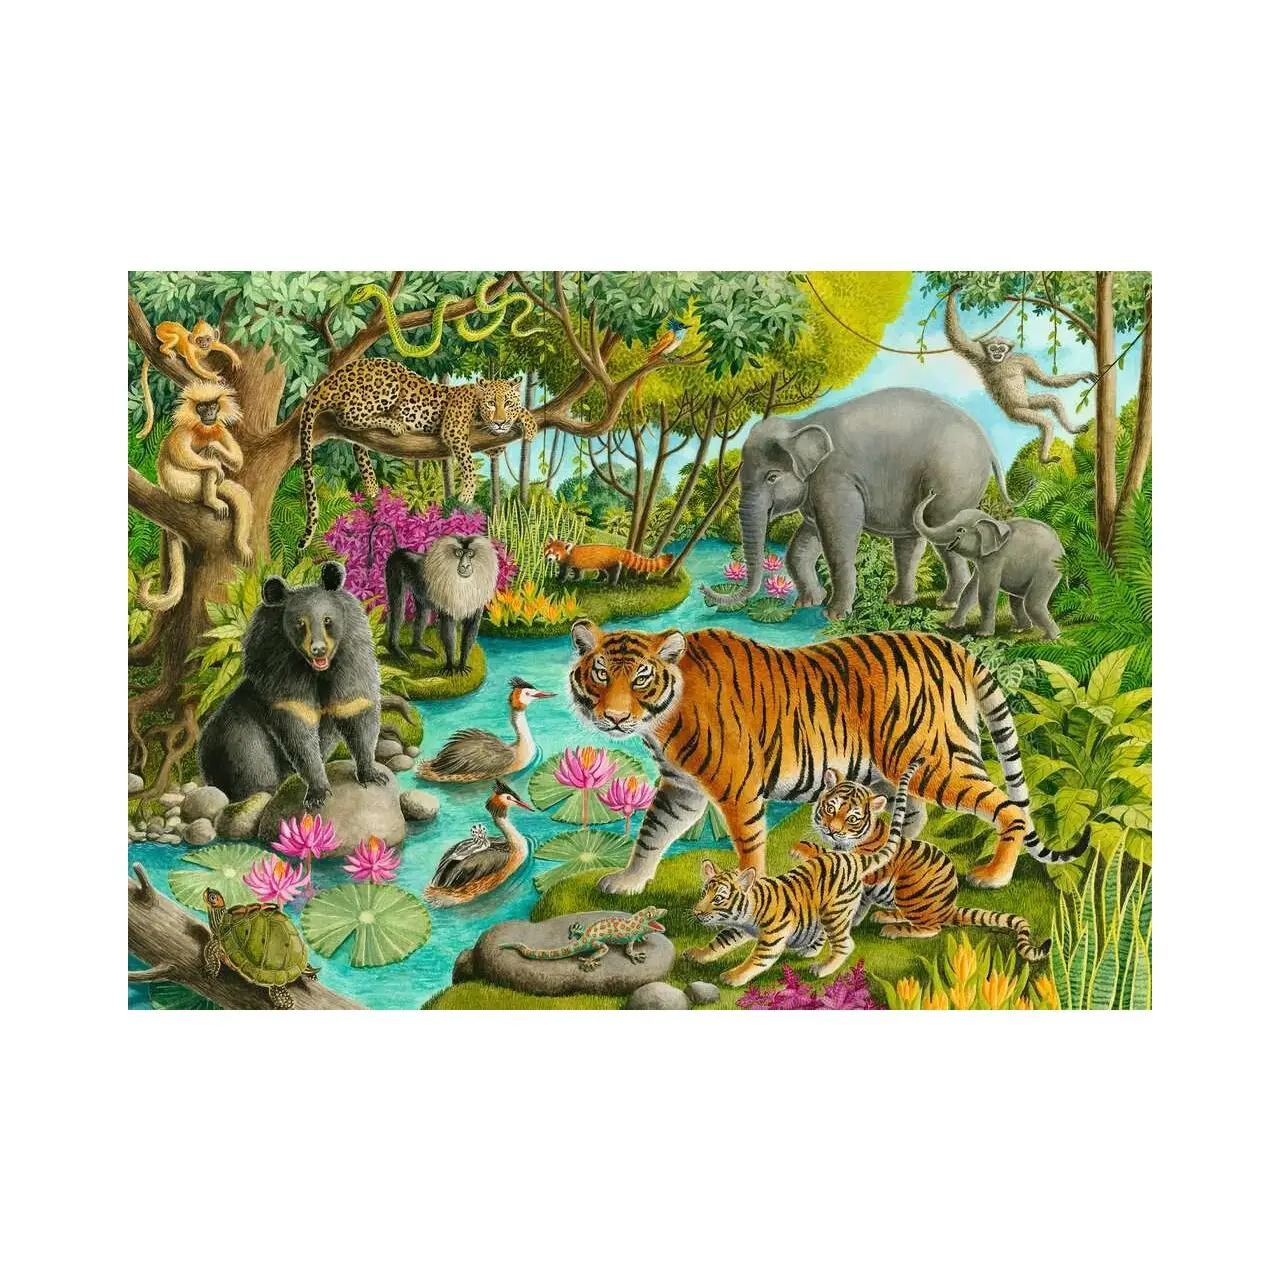 60 Teile Wald Puzzle in Indien